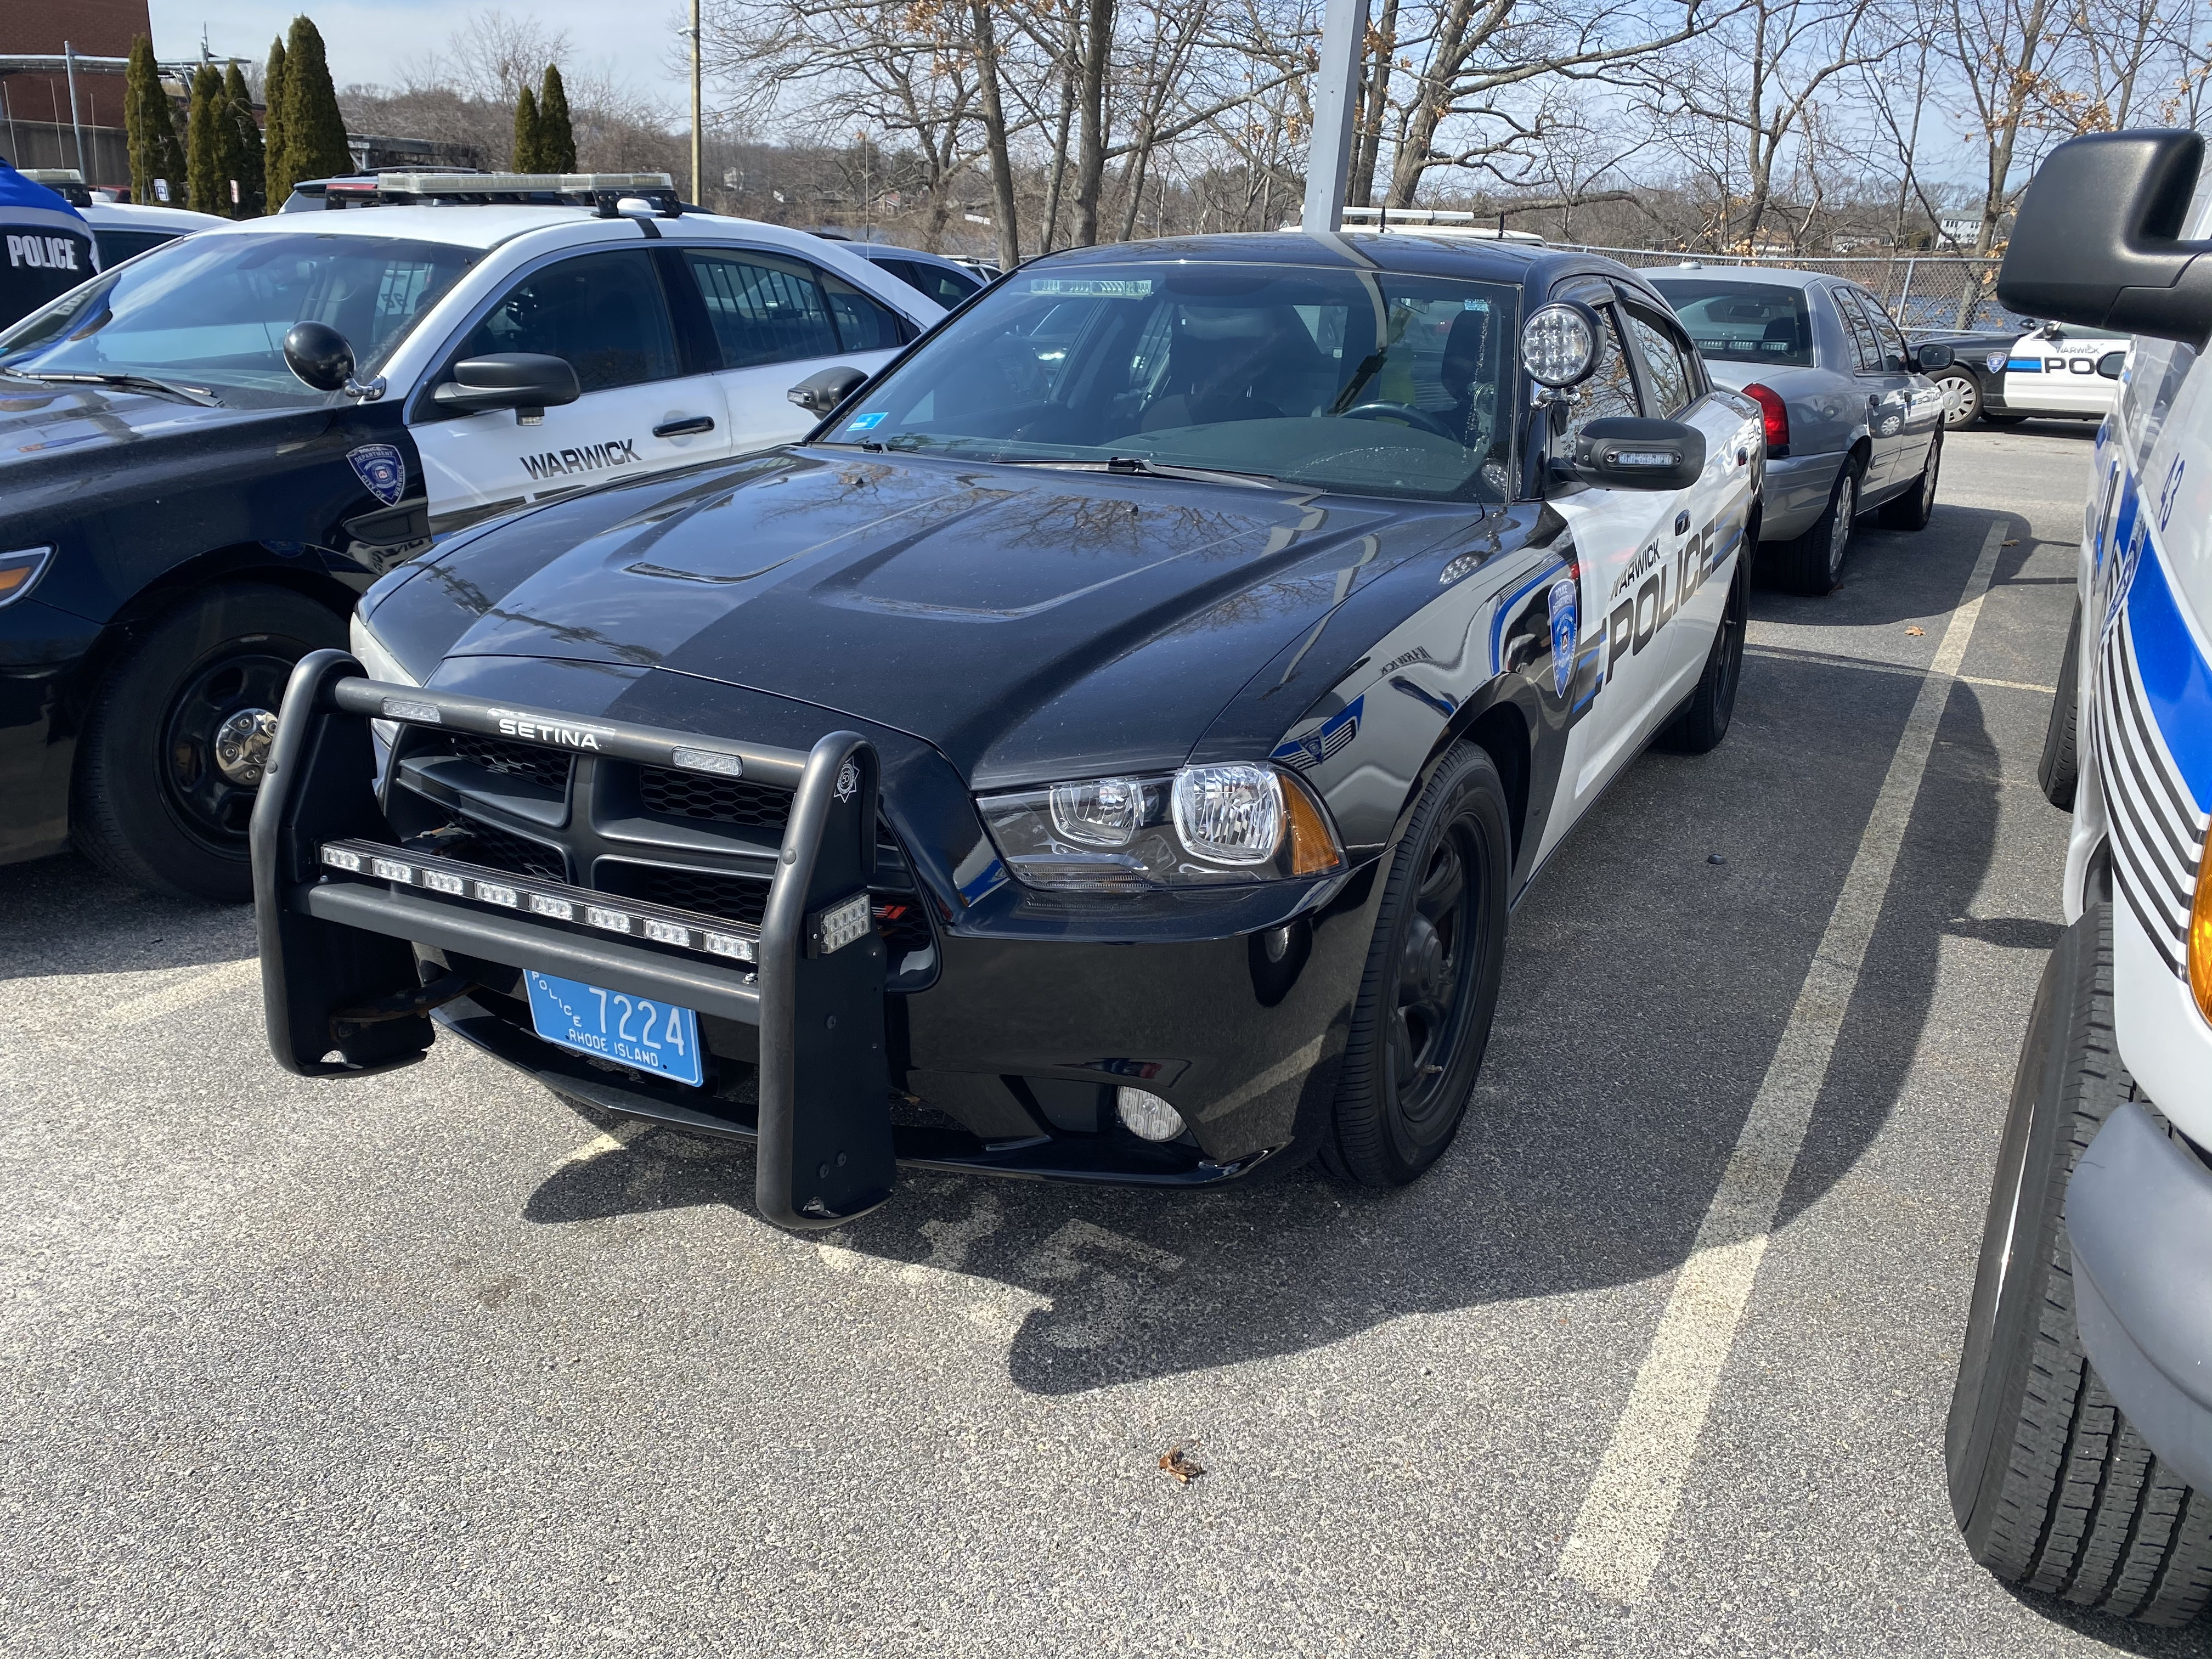 A photo  of Warwick Police
            Cruiser CP-58, a 2014 Dodge Charger             taken by @riemergencyvehicles